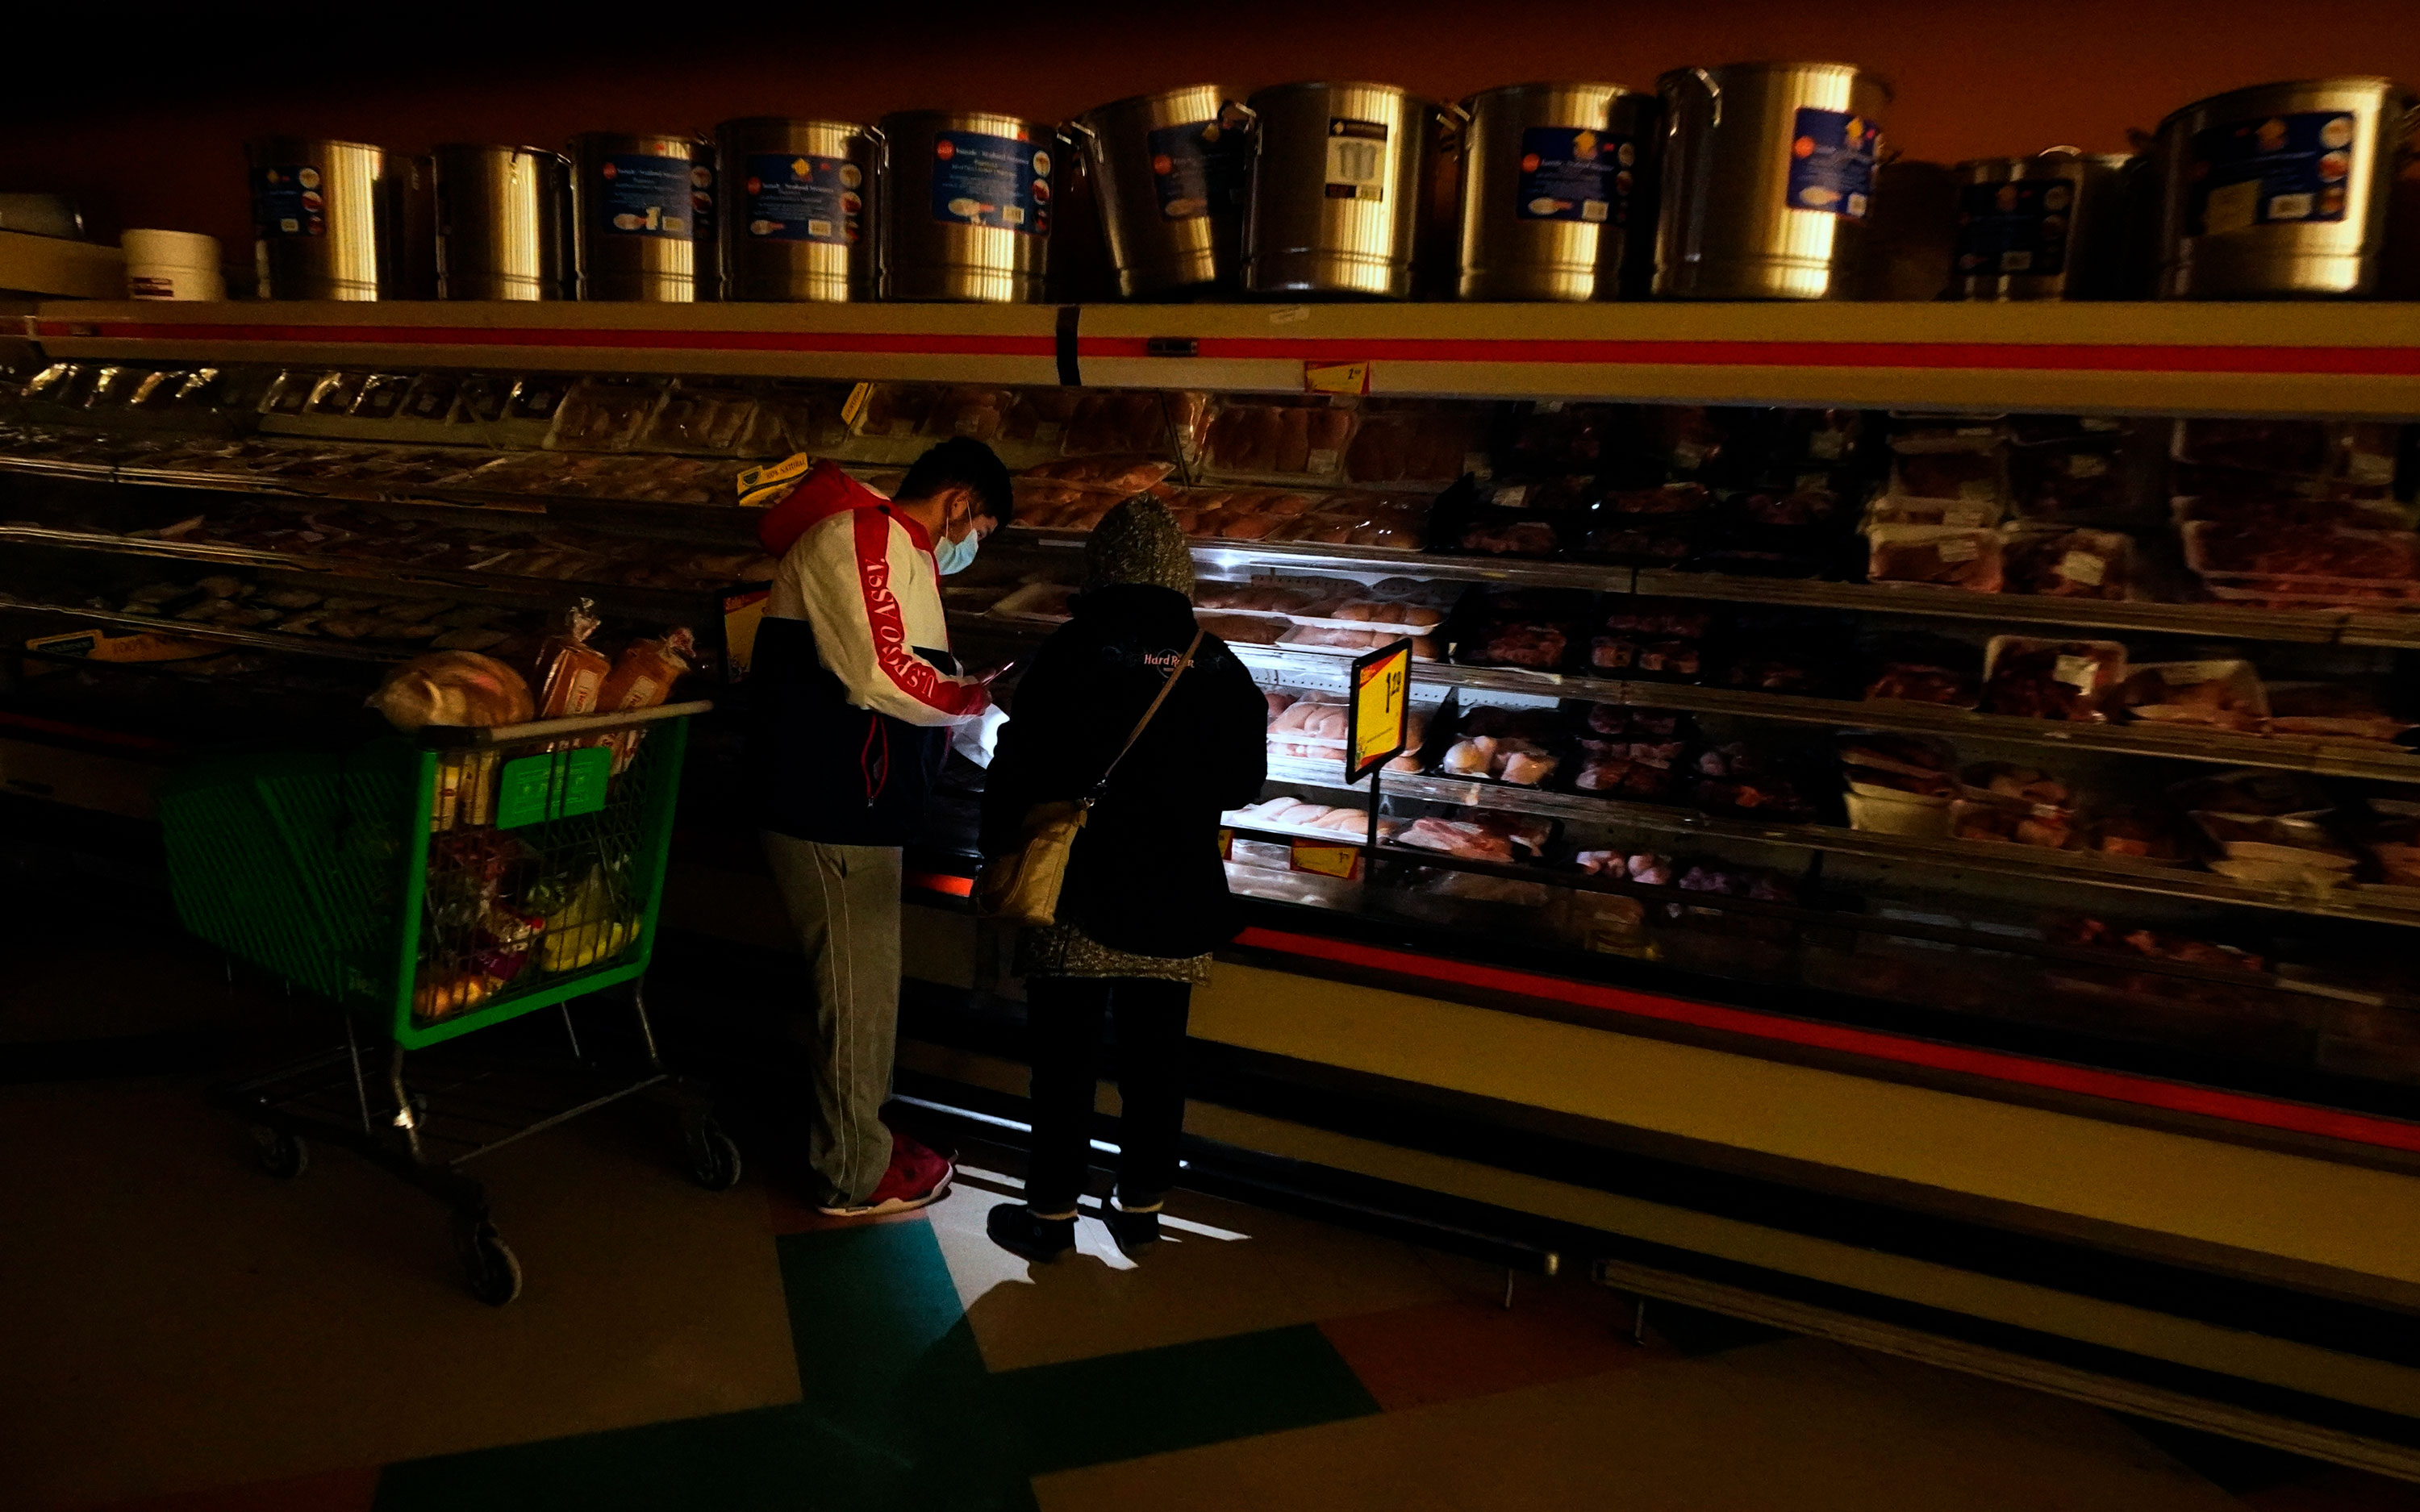 Customers use the light from a cell phone to look in the meat section of a grocery store on February 16 in Dallas, Texas.